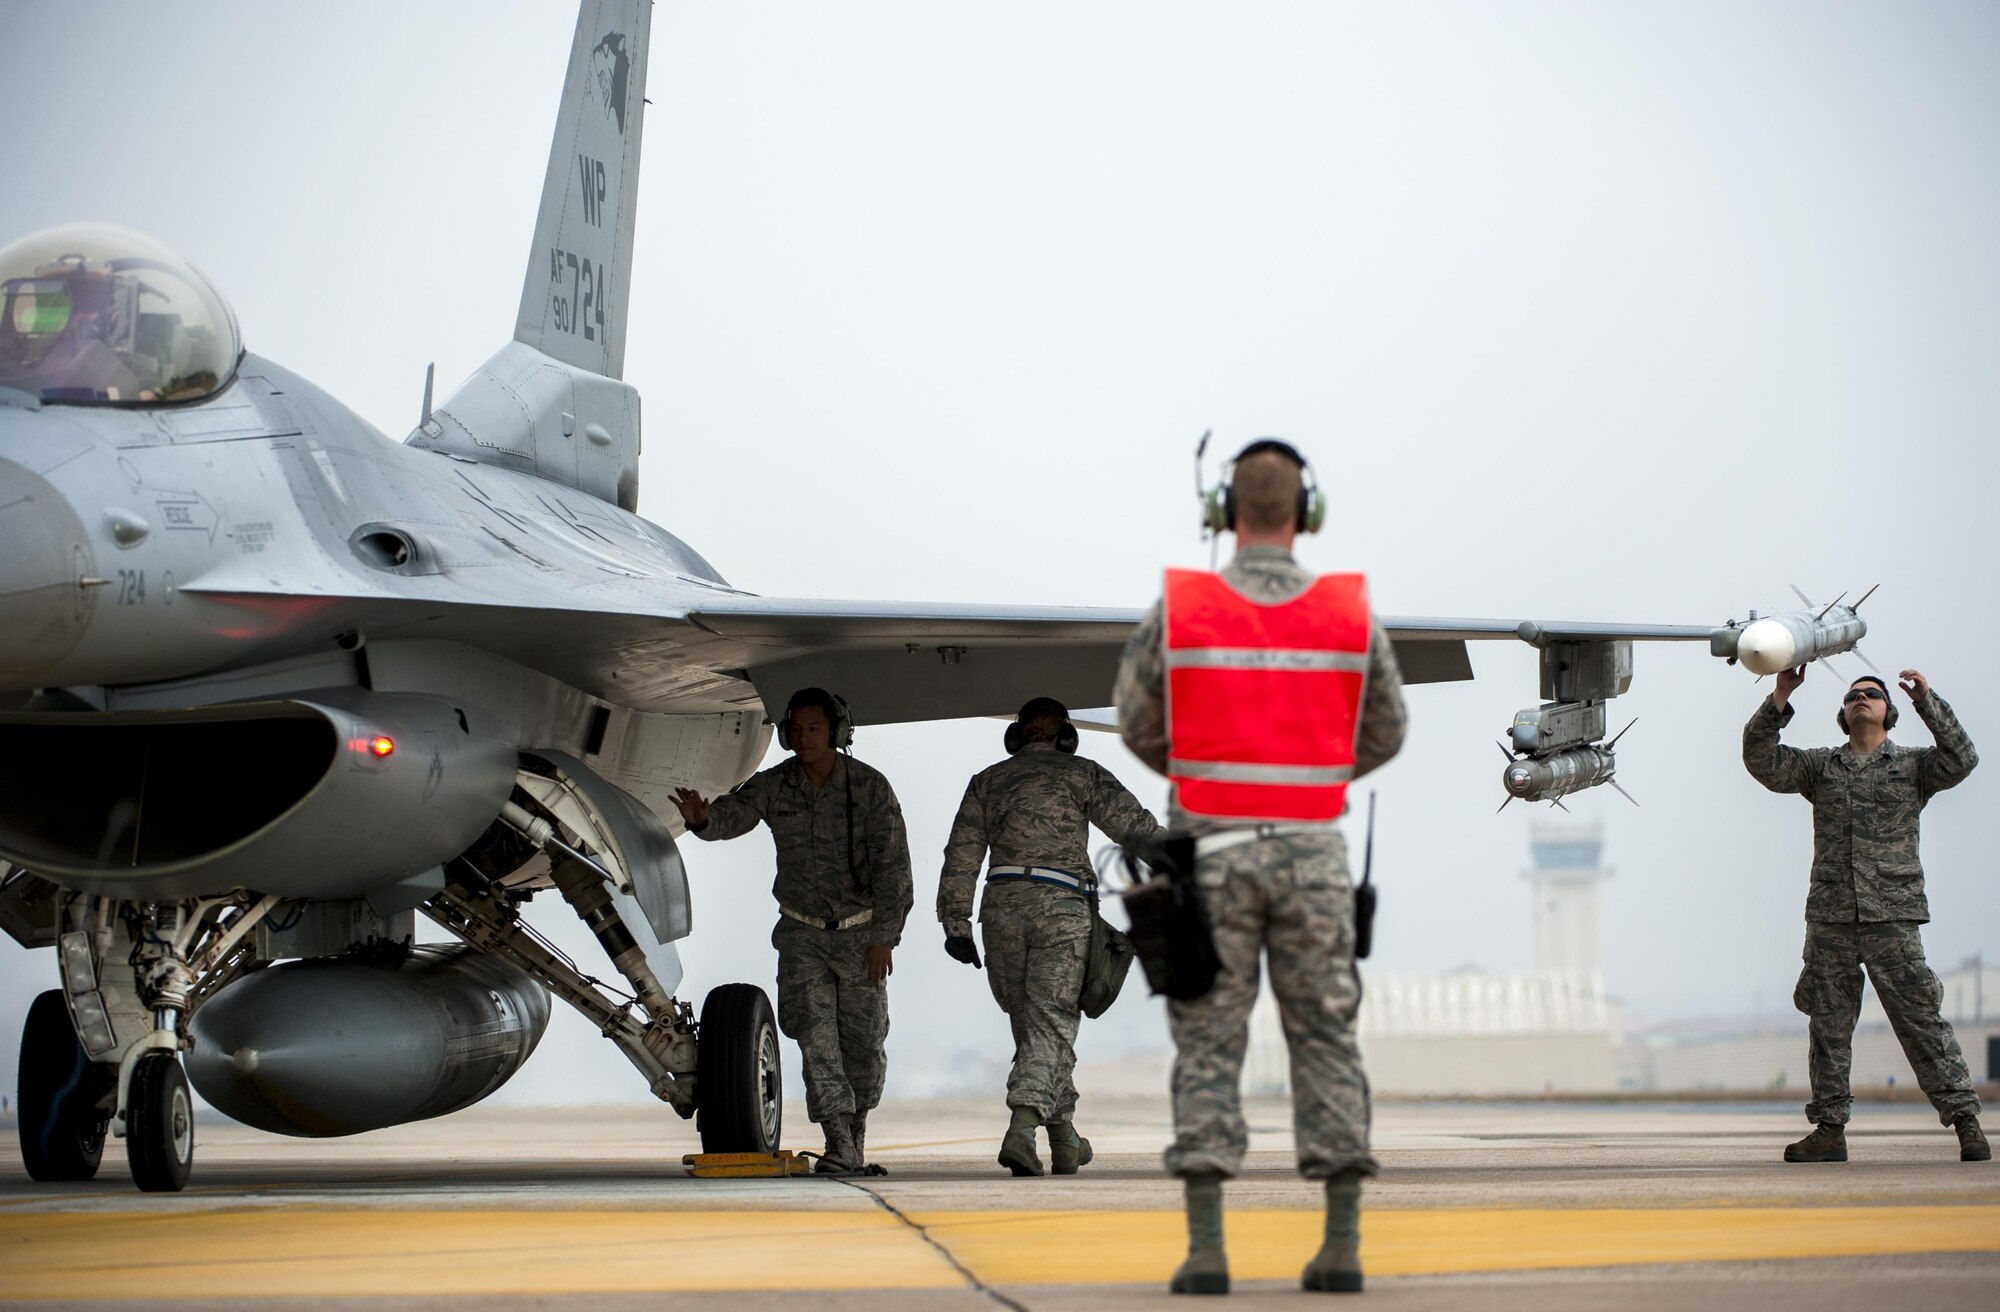 Airmen from the 8th Aircraft Maintenance Squadron conduct a preflight inspection on an F-16 Fighting Falcon as part of Buddy Wing 15-7 at Kunsan Air Base, Republic of Korea, Nov. 17, 2015. Buddy Wing is part of a combined fighter exchange program designed to improve interoperability between U.S. Air Force and ROKAF fighter squadrons and are conducted multiple times throughout the year in order to promote cultural awareness and sharpen combined combat capabilities. (U.S. Air Force photo by Staff Sgt. Nick Wilson/Released)